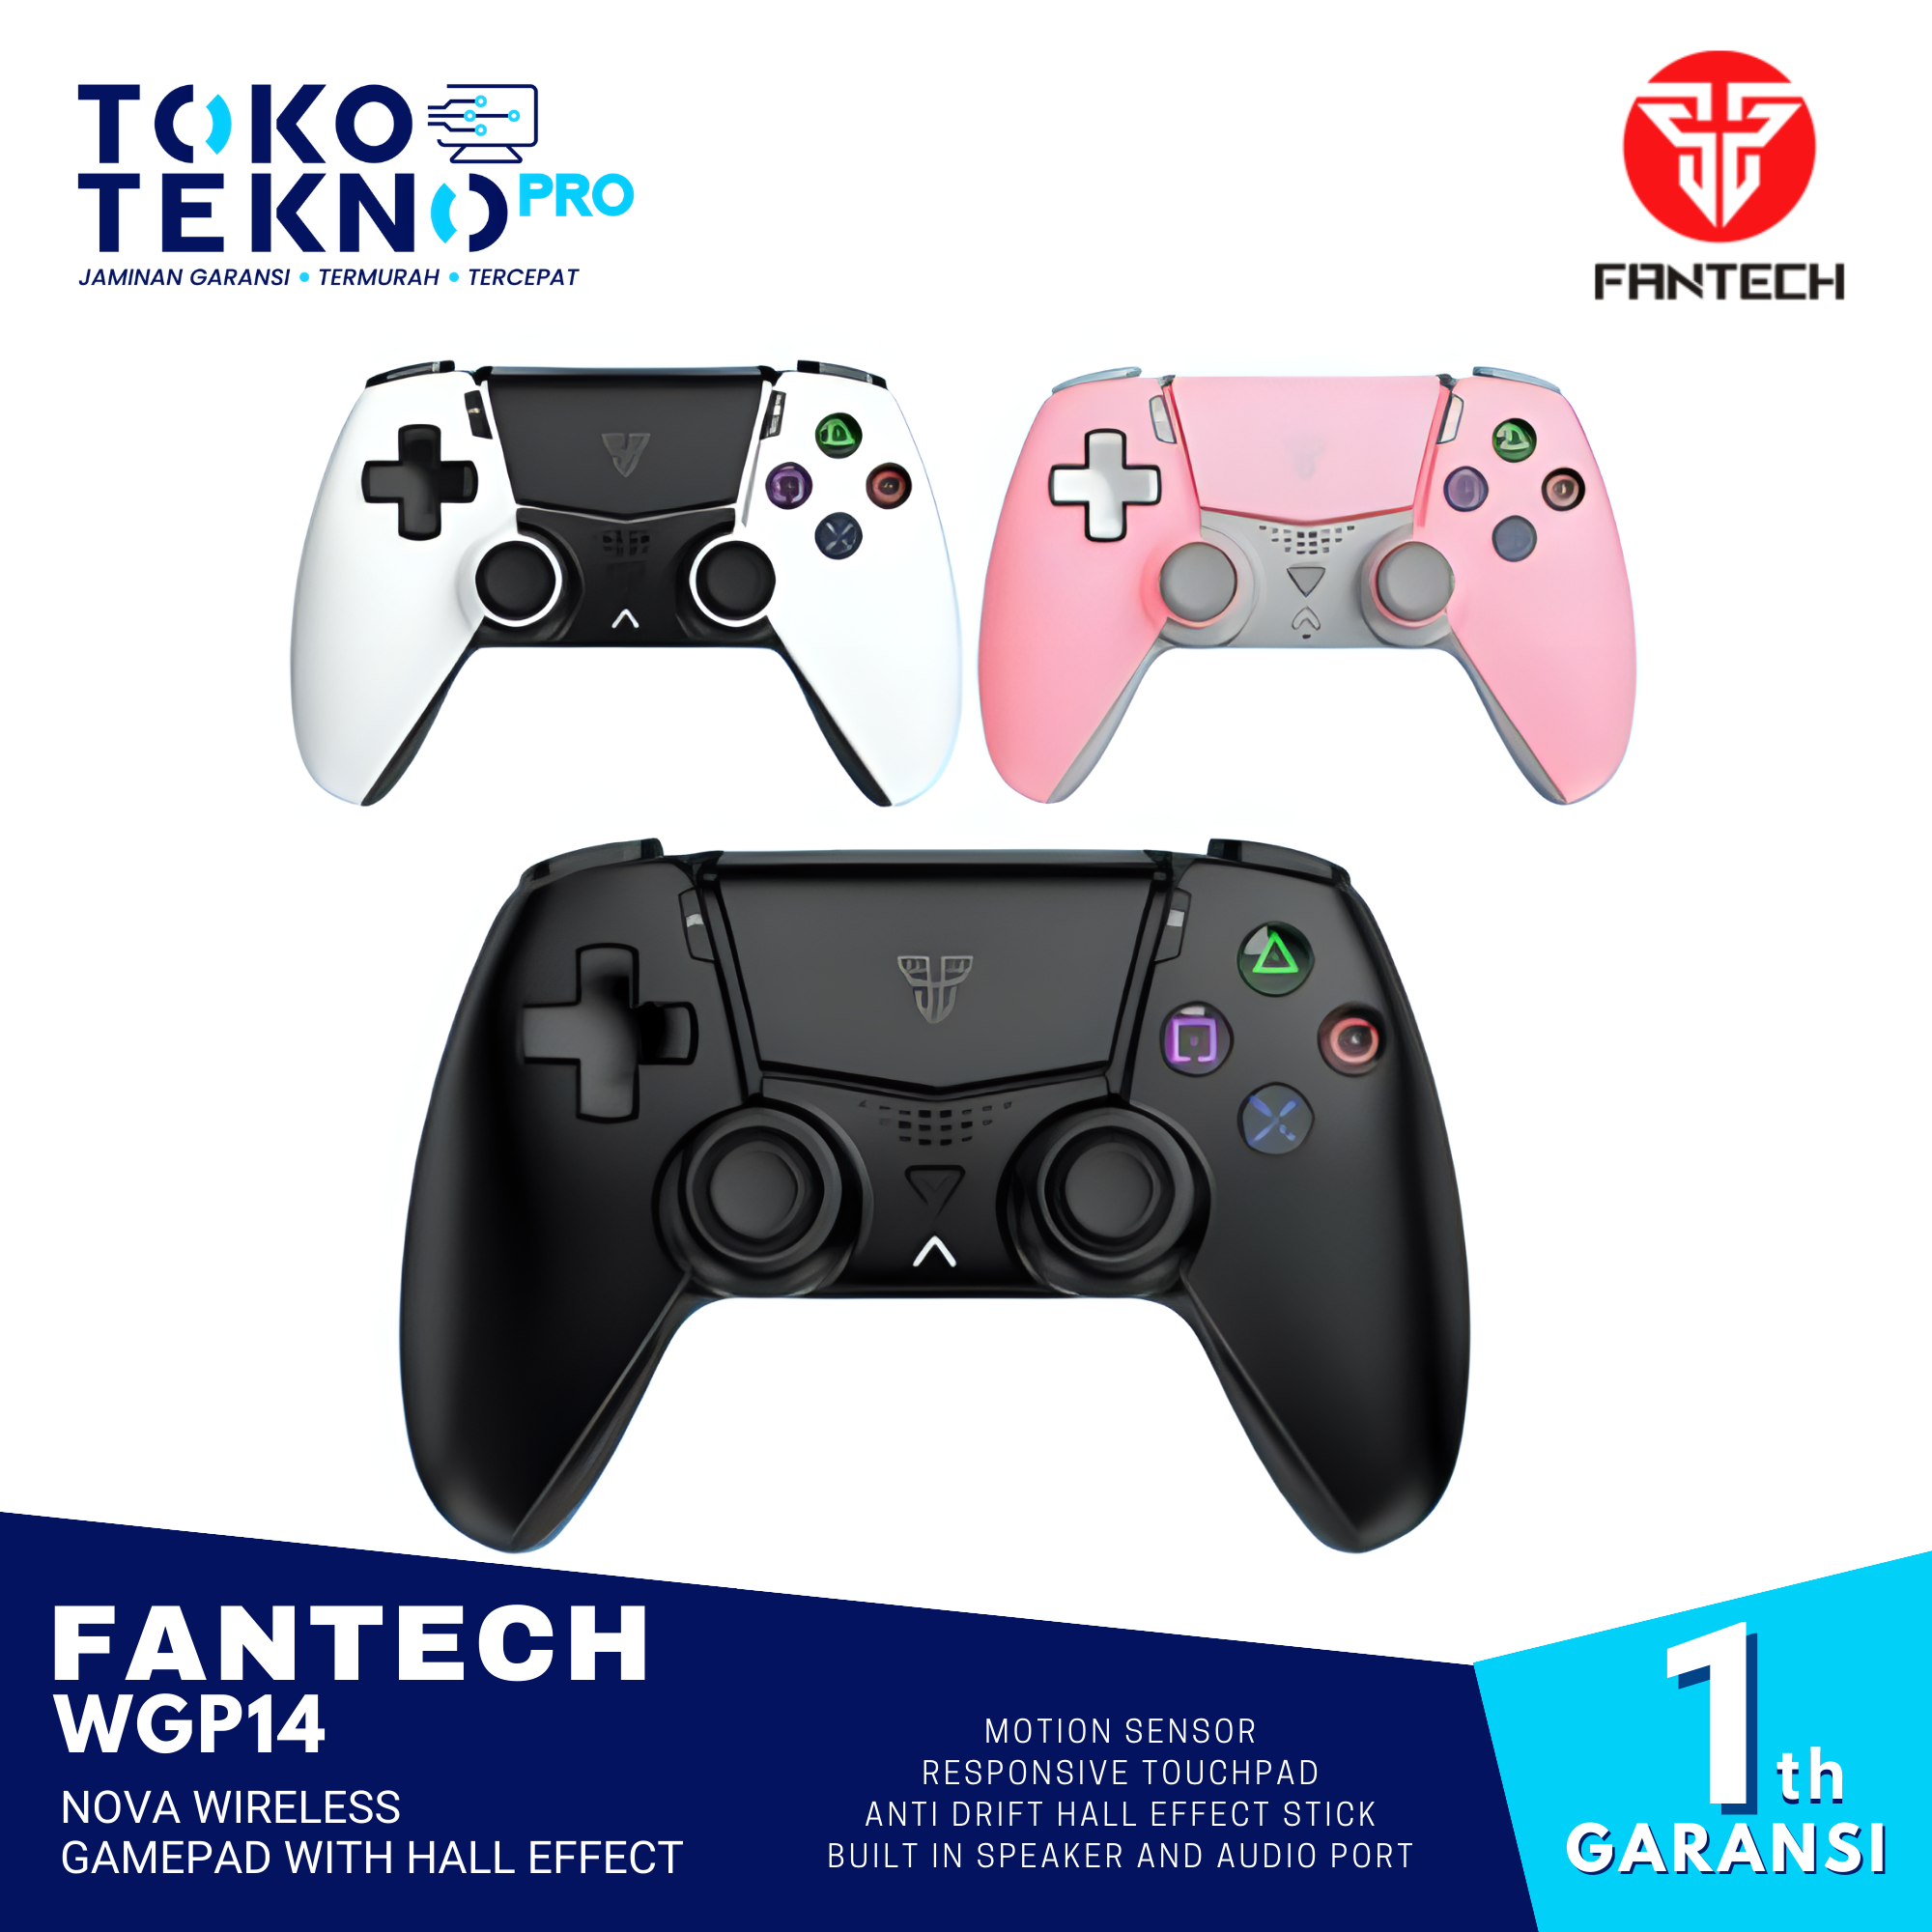 Fantech WGP14 Nova Wireless Gamepad With Hall Effect For PS Android PC